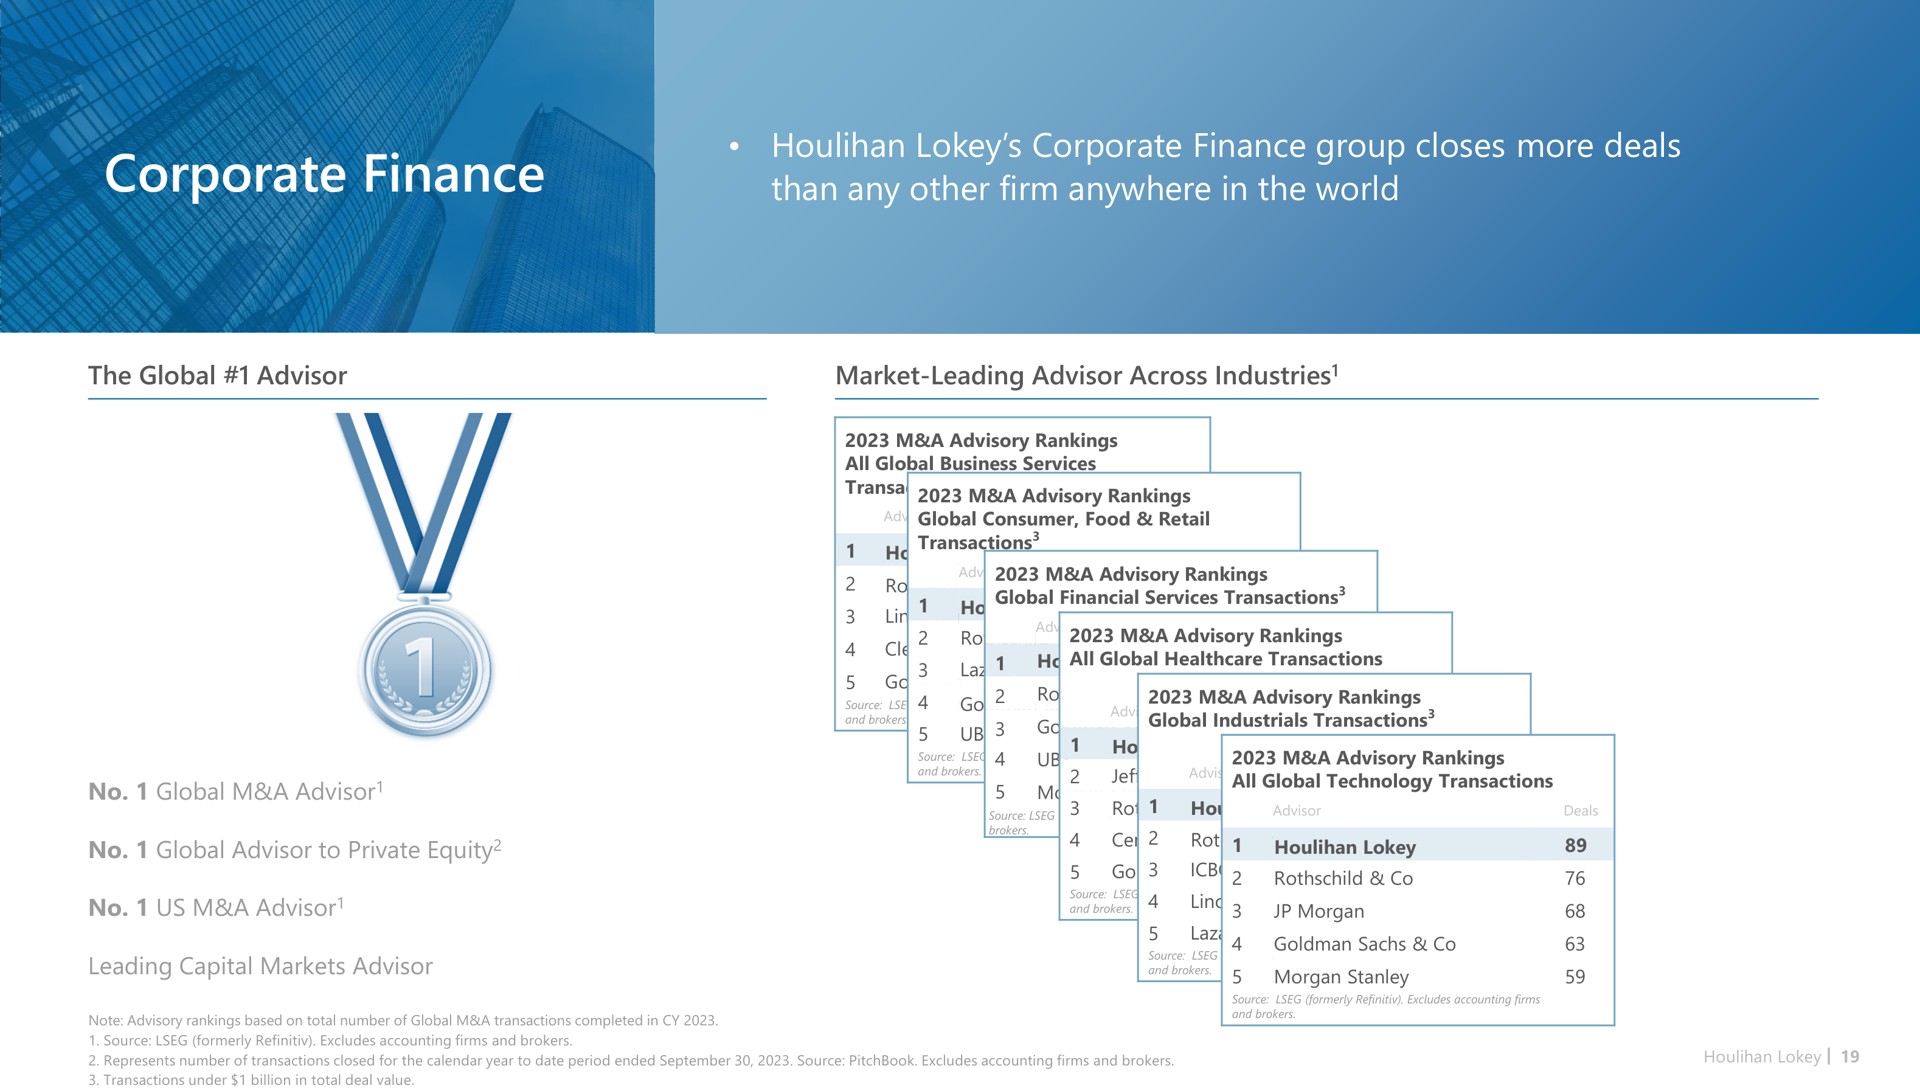 corporate finance corporate finance group closes more deals than any other firm anywhere in the world | Houlihan Lokey